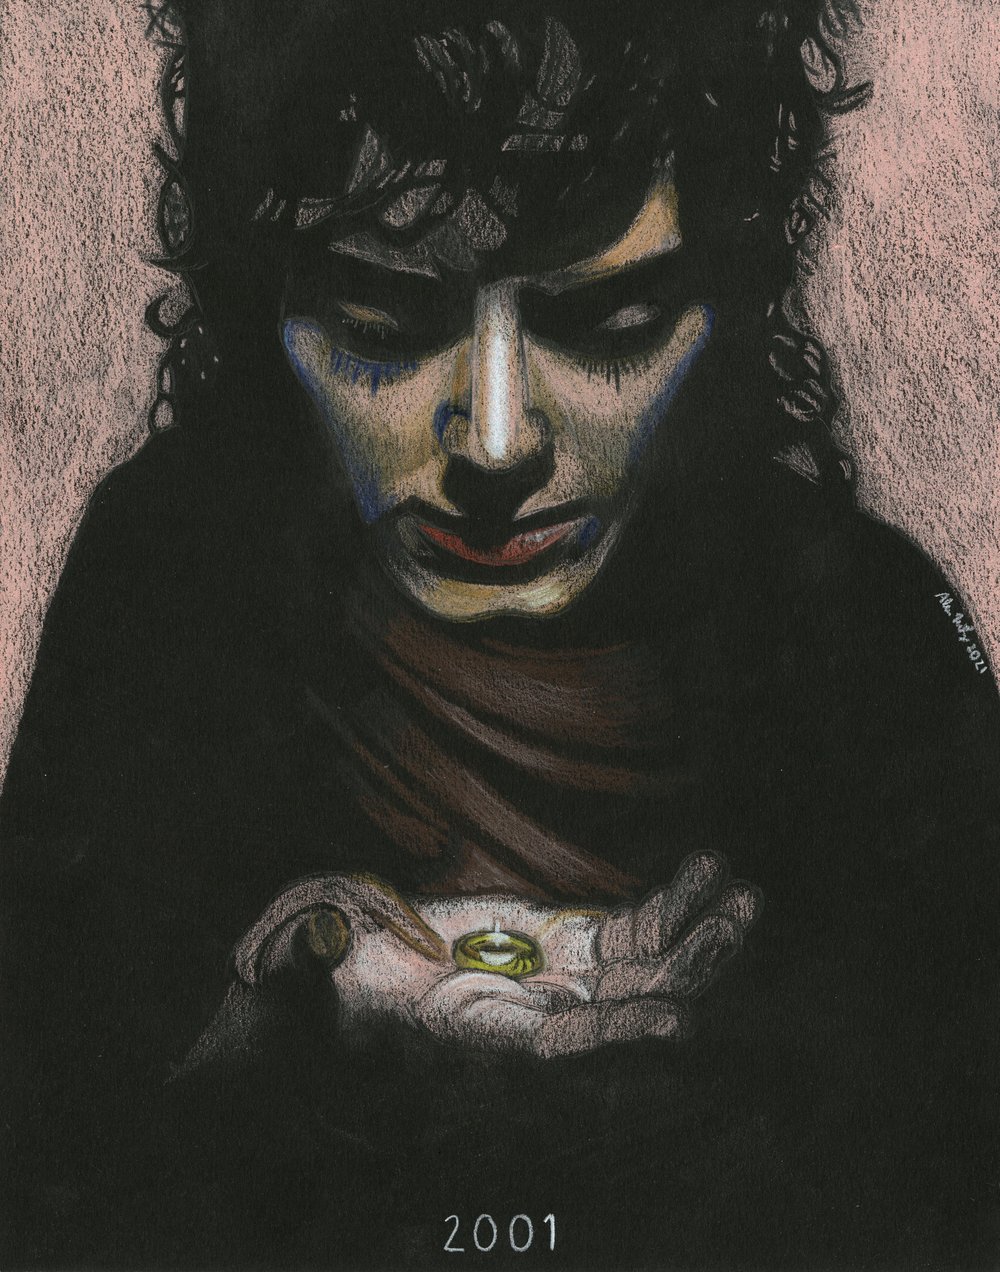 Image of “I will take the ring, though I do not know the way.” LOTR THE FELLOWSHIP OF THE RING Art Print